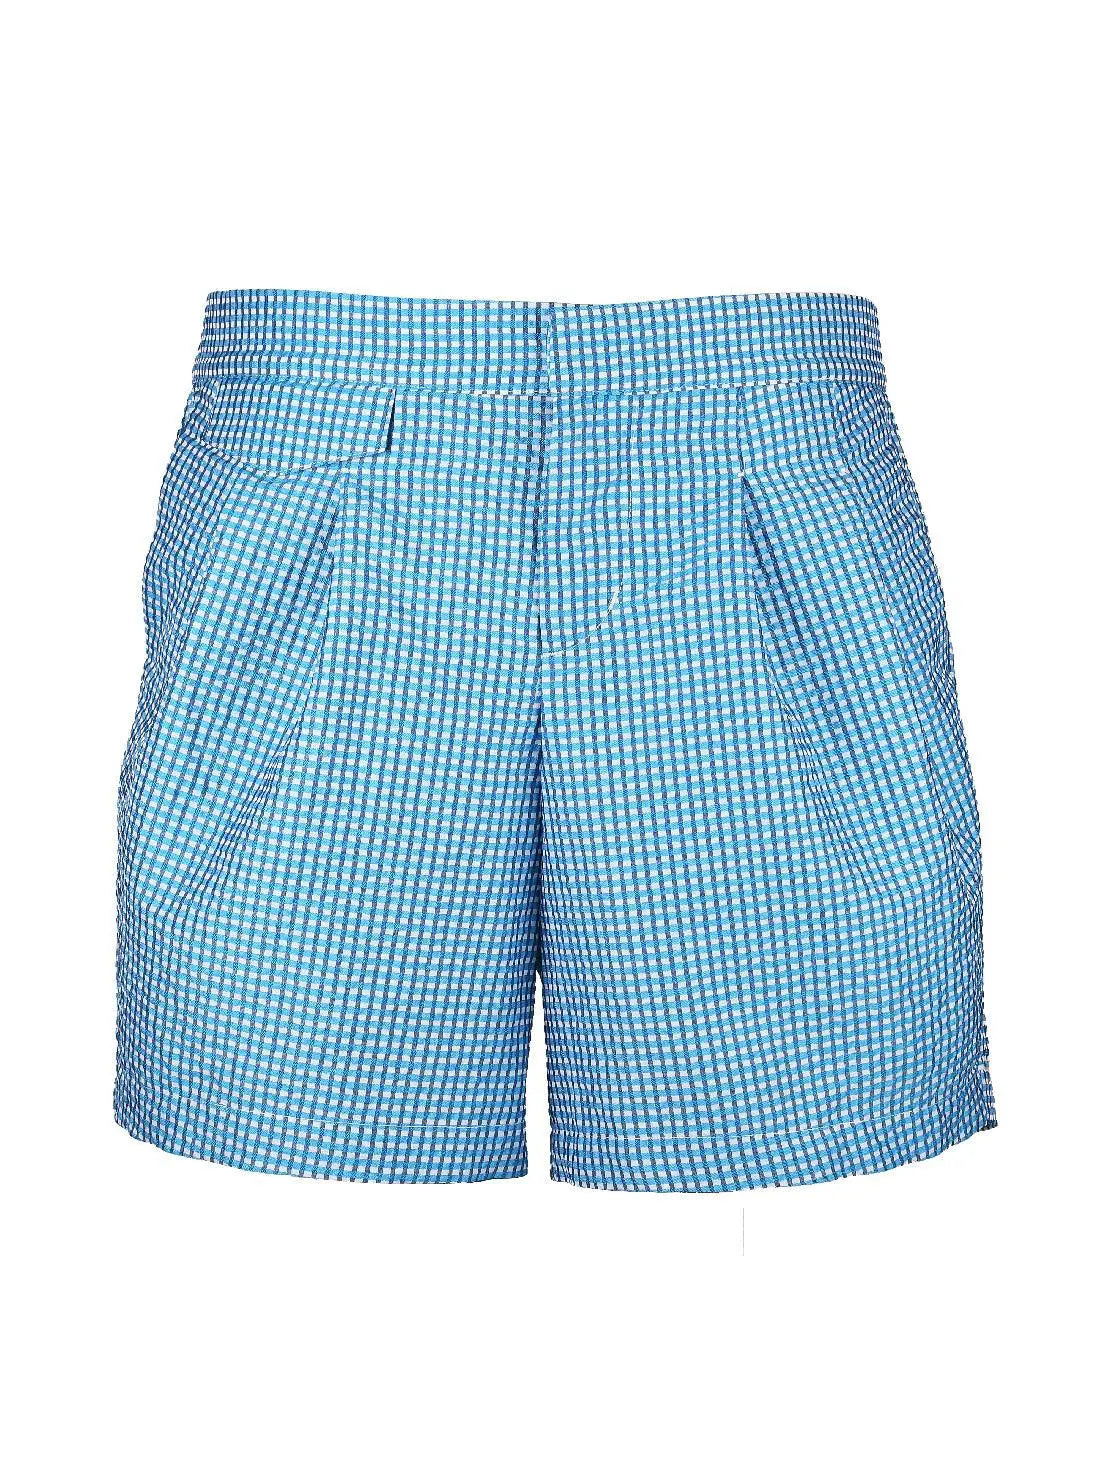 A pair of Taia Blue Swimwear by Bassal with side pockets. The fabric appears lightweight and textured, offering a casual and comfortable style perfect for strolling around Barcelona or shopping at Bassalstore.